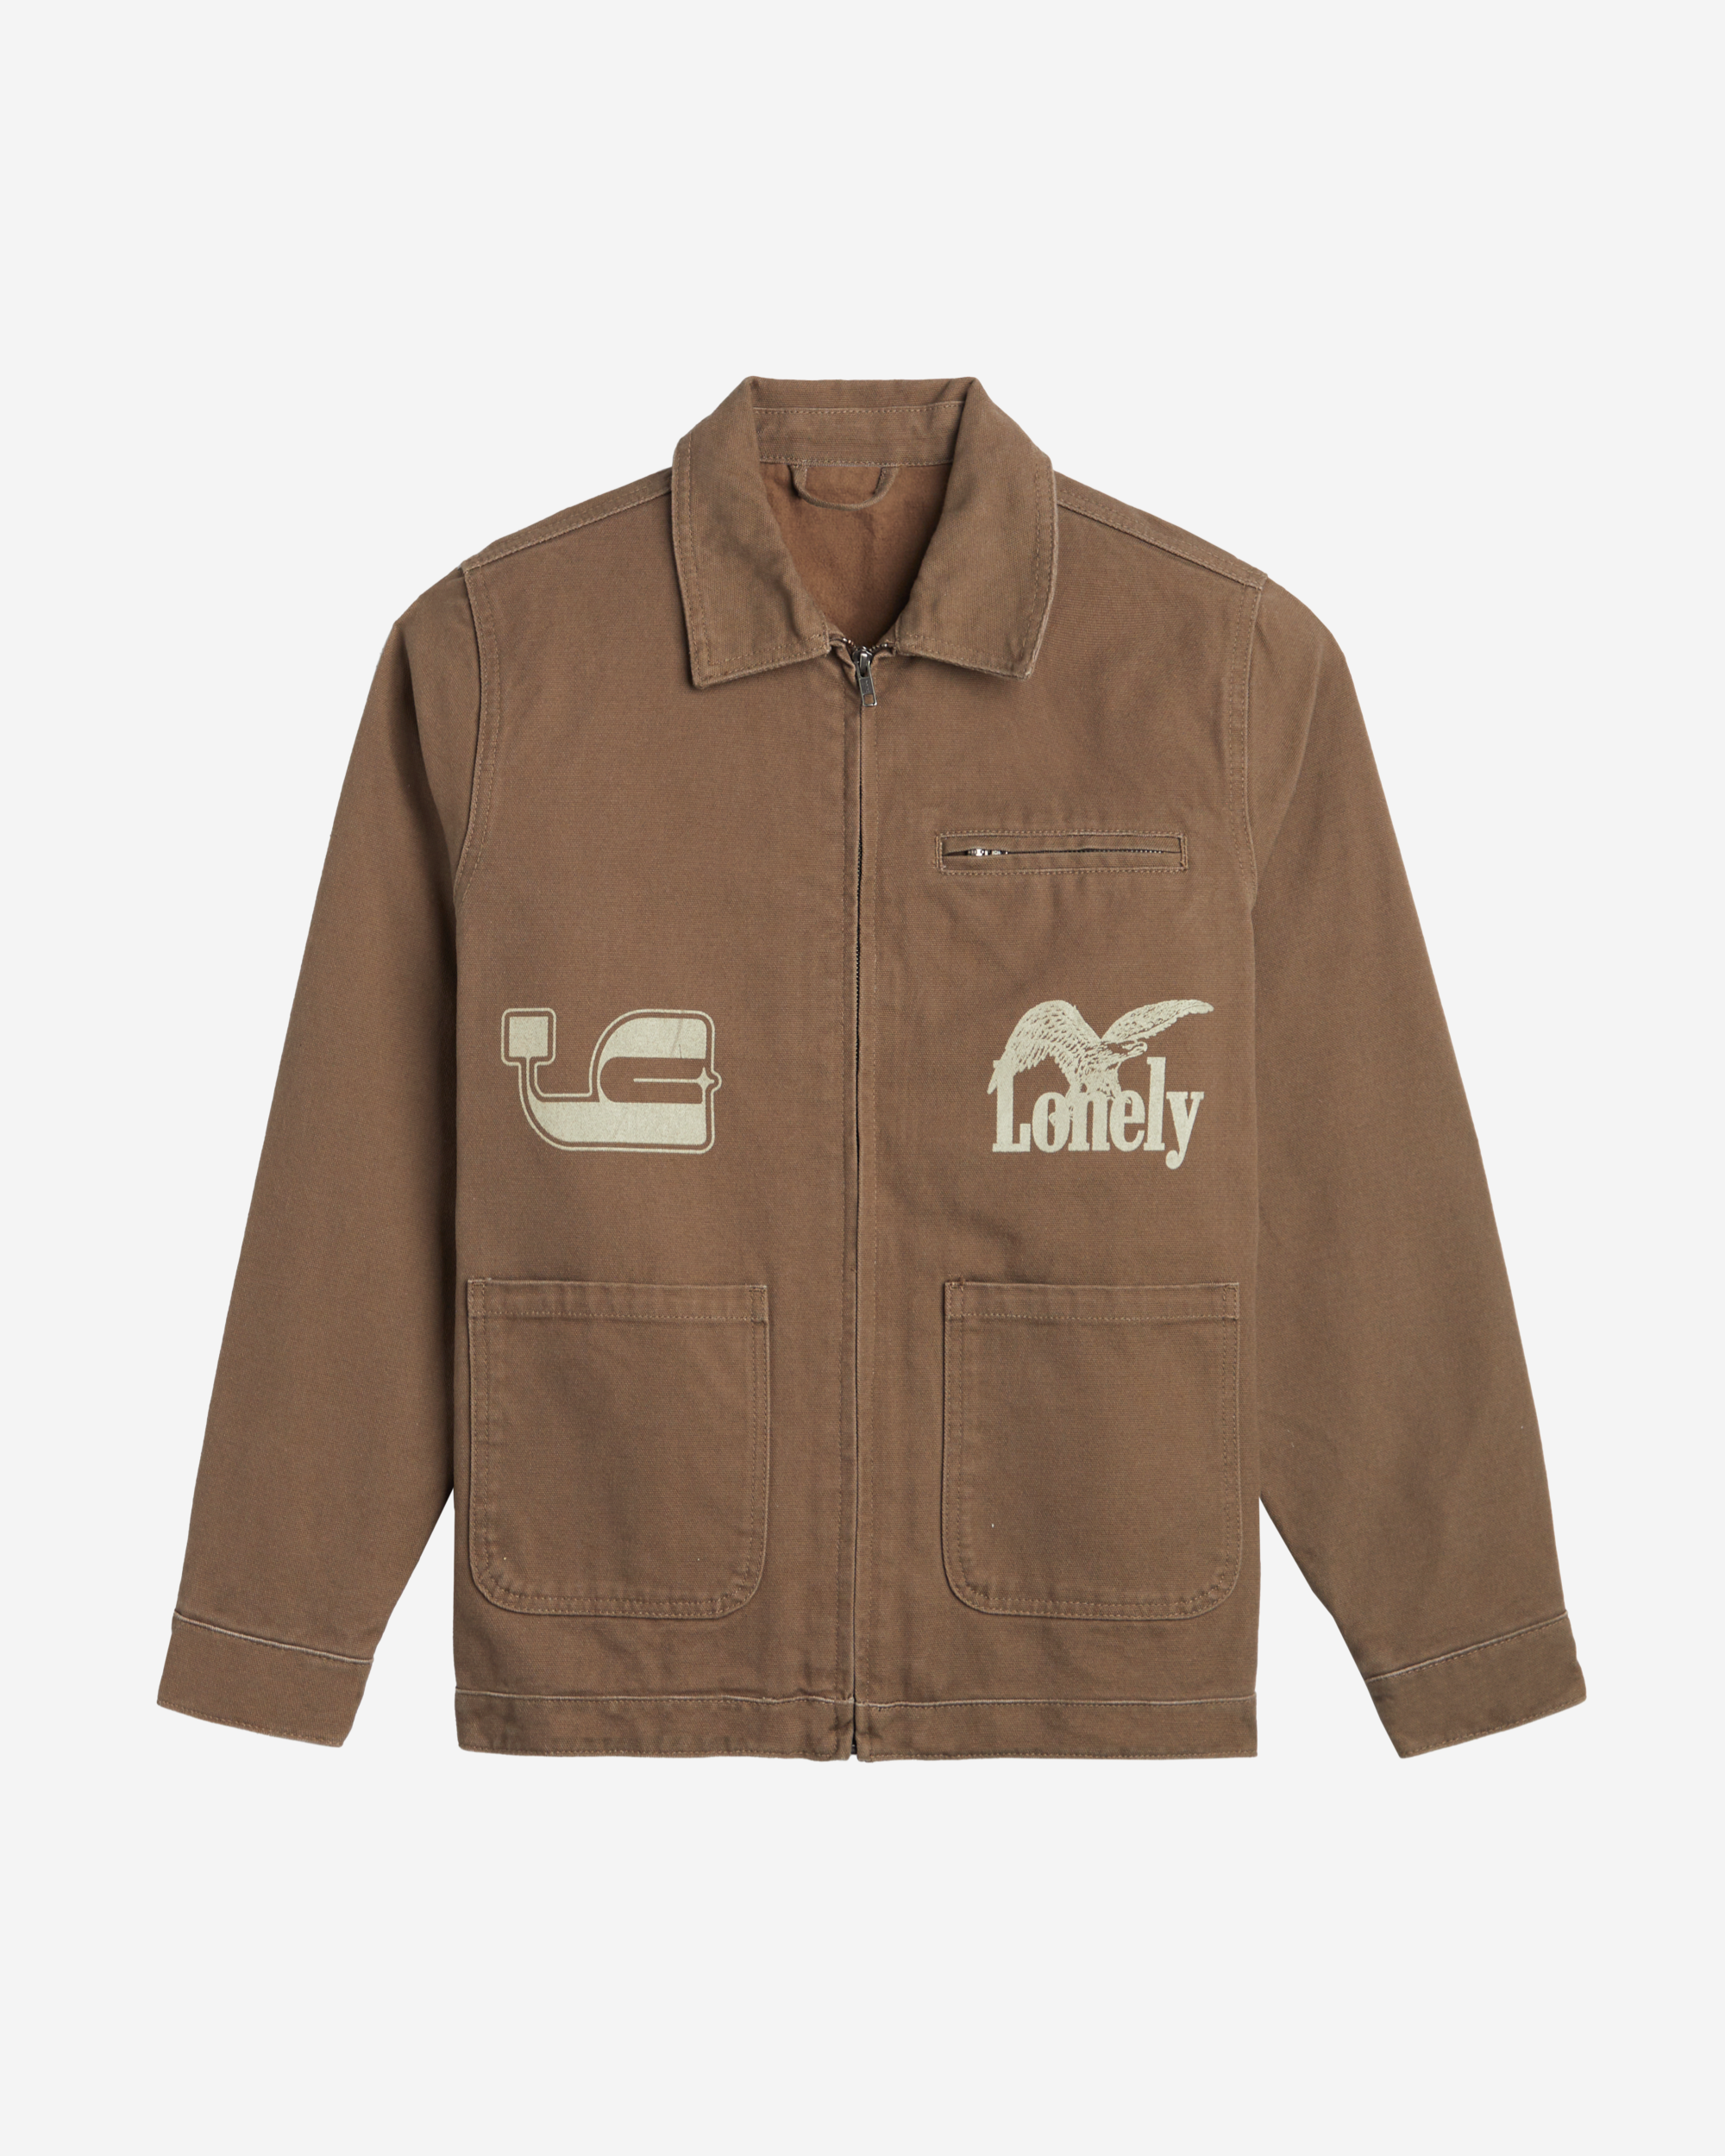 Lonely Road Work Jacket